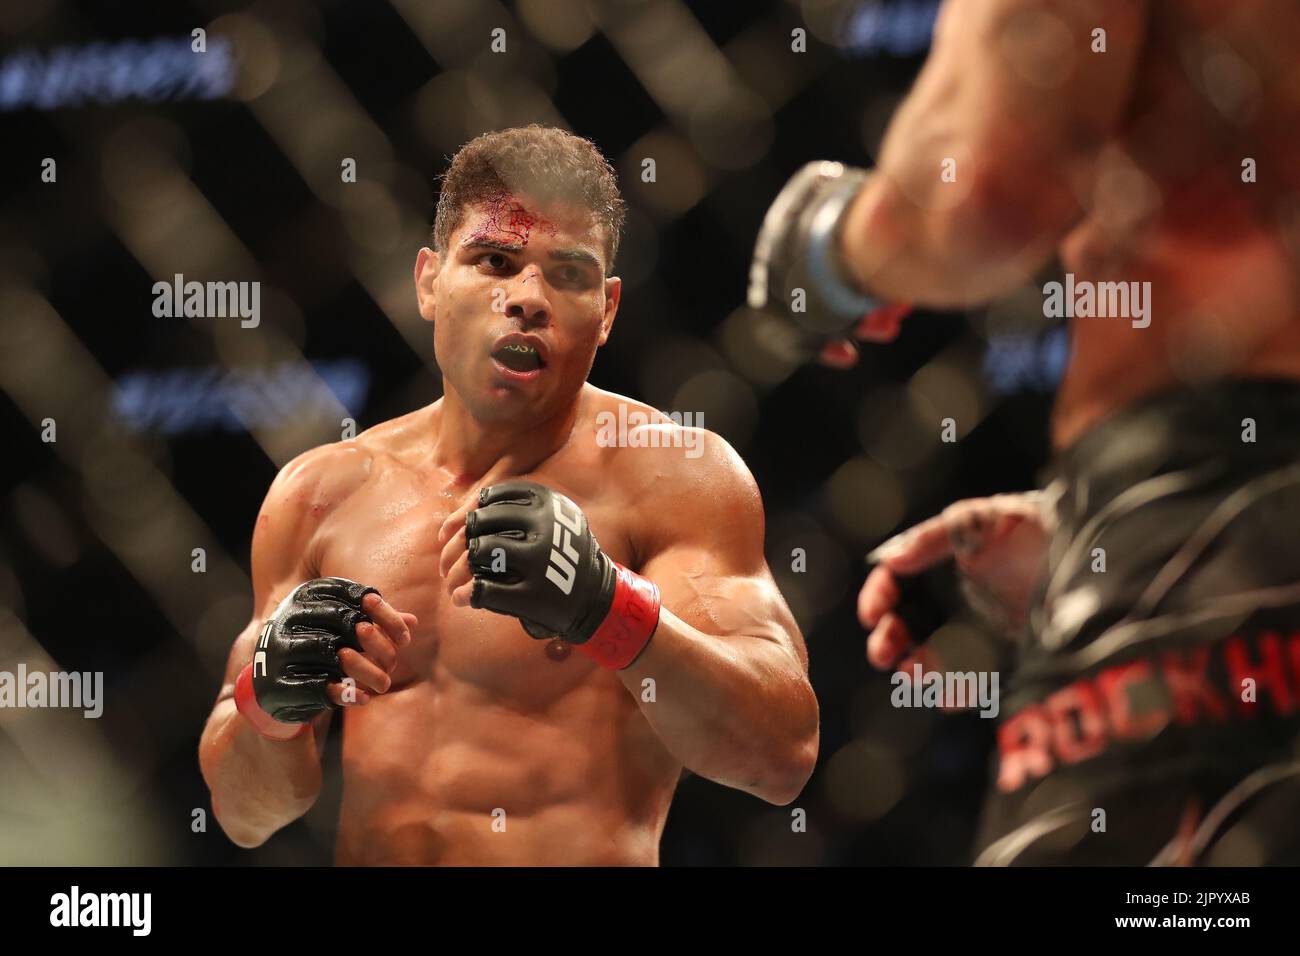 Salt Lake City, United States. 20th Aug, 2022. SALT LAKE CITY, UT - AUGUST 20: (L-R) Paulo Costa battles Luke Rockhold in their Middleweight bout during the UFC 278 at the Vivint Arena on August 20, 2022 in Salt Lake City, Utah, United States. (Photo by Alejandro Salazar/PxImages) Credit: Px Images/Alamy Live News Stock Photo